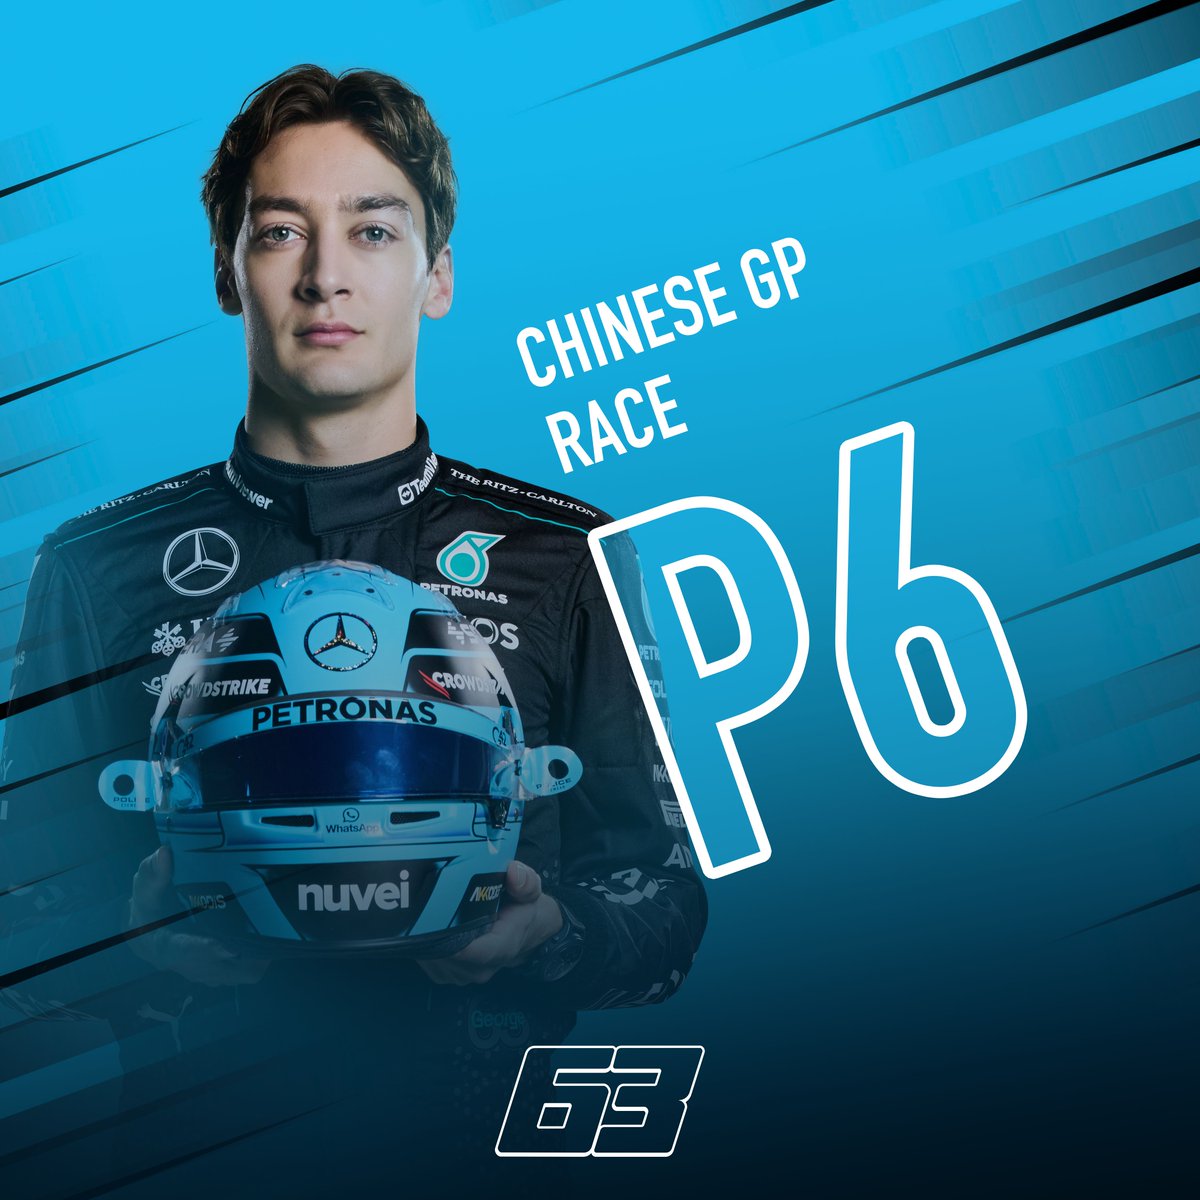 GR finishes P6 in the #ChineseGP! 🇨🇳💙 #GR63 #F1 #Formula1 #FormulaOne #Motorsport #ChineseGP